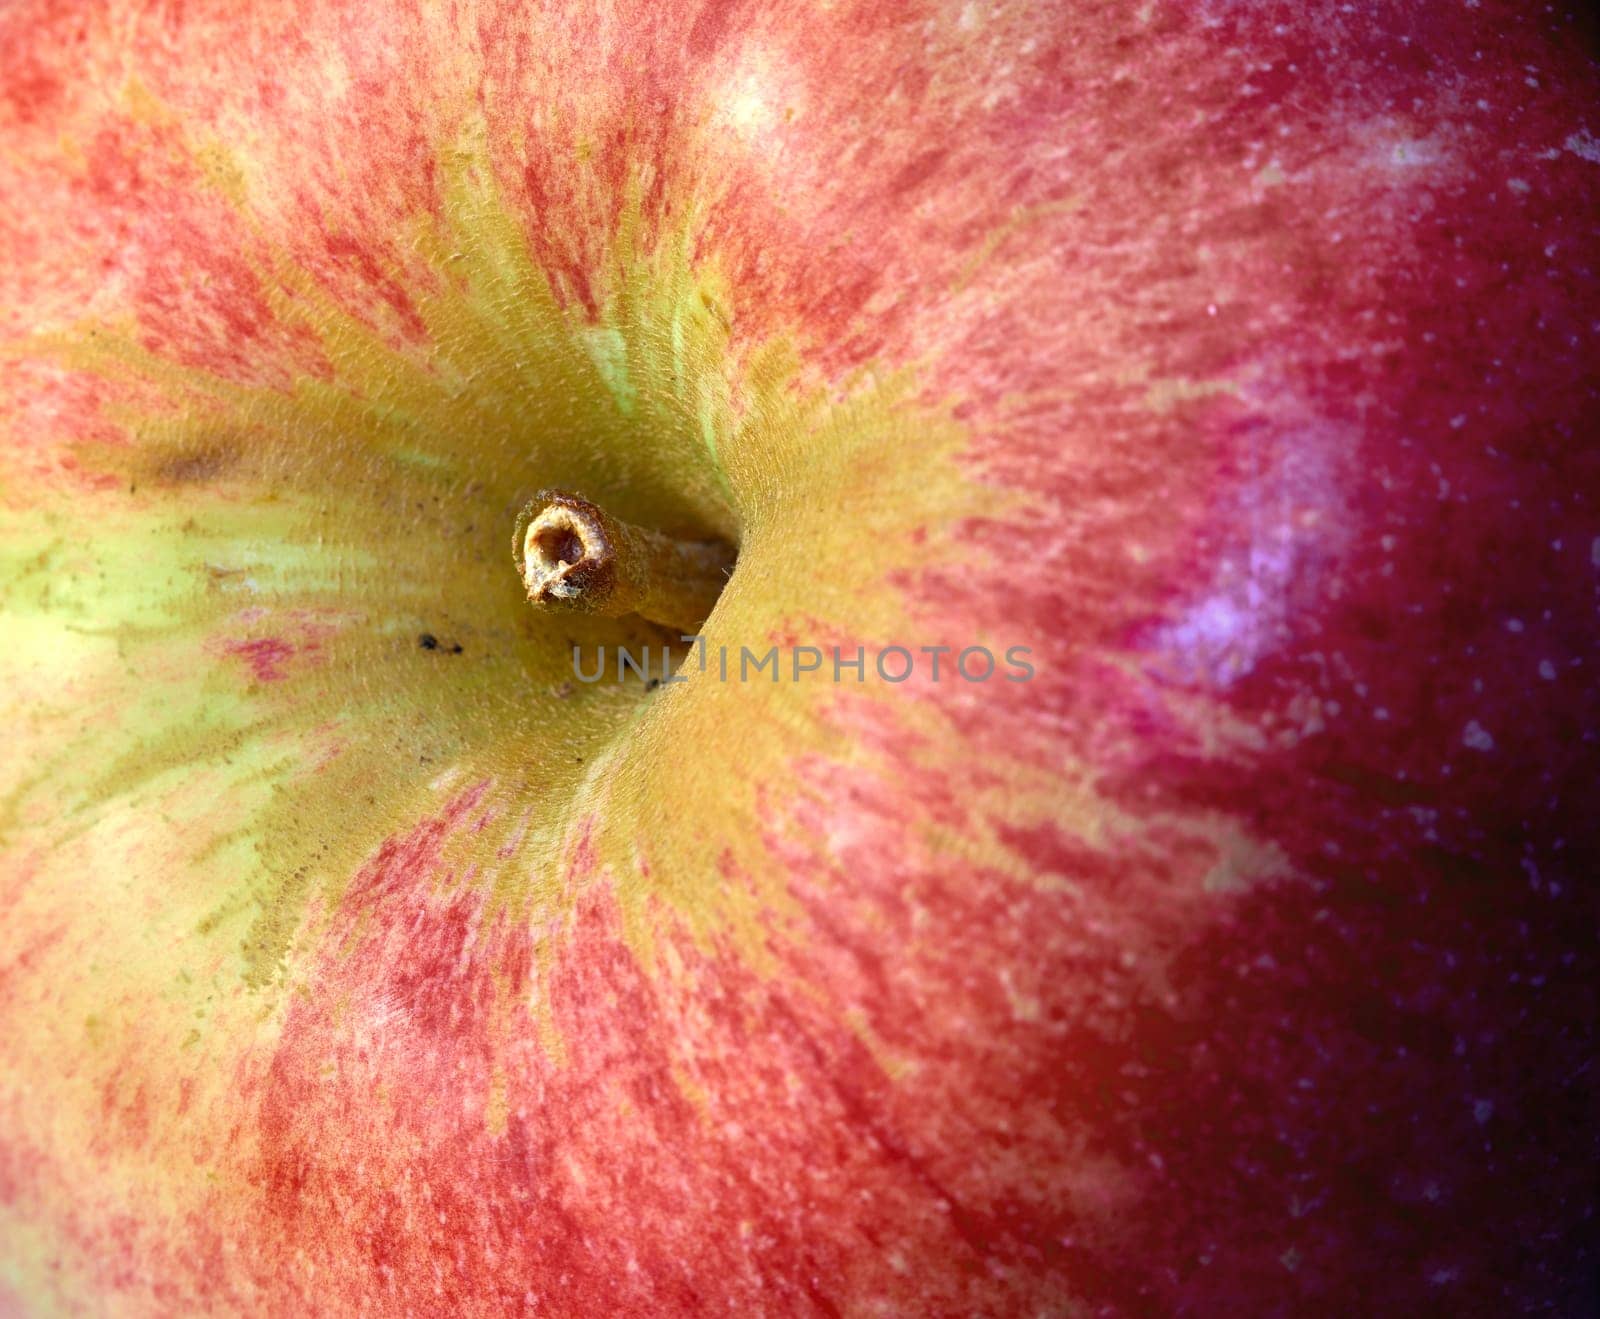 Closeup of red apple, nutrition and diet with health, wellness and organic vitamins and snack. Fruit, plant and harvest with botanical produce, horticulture and spring vegetation for agriculture.